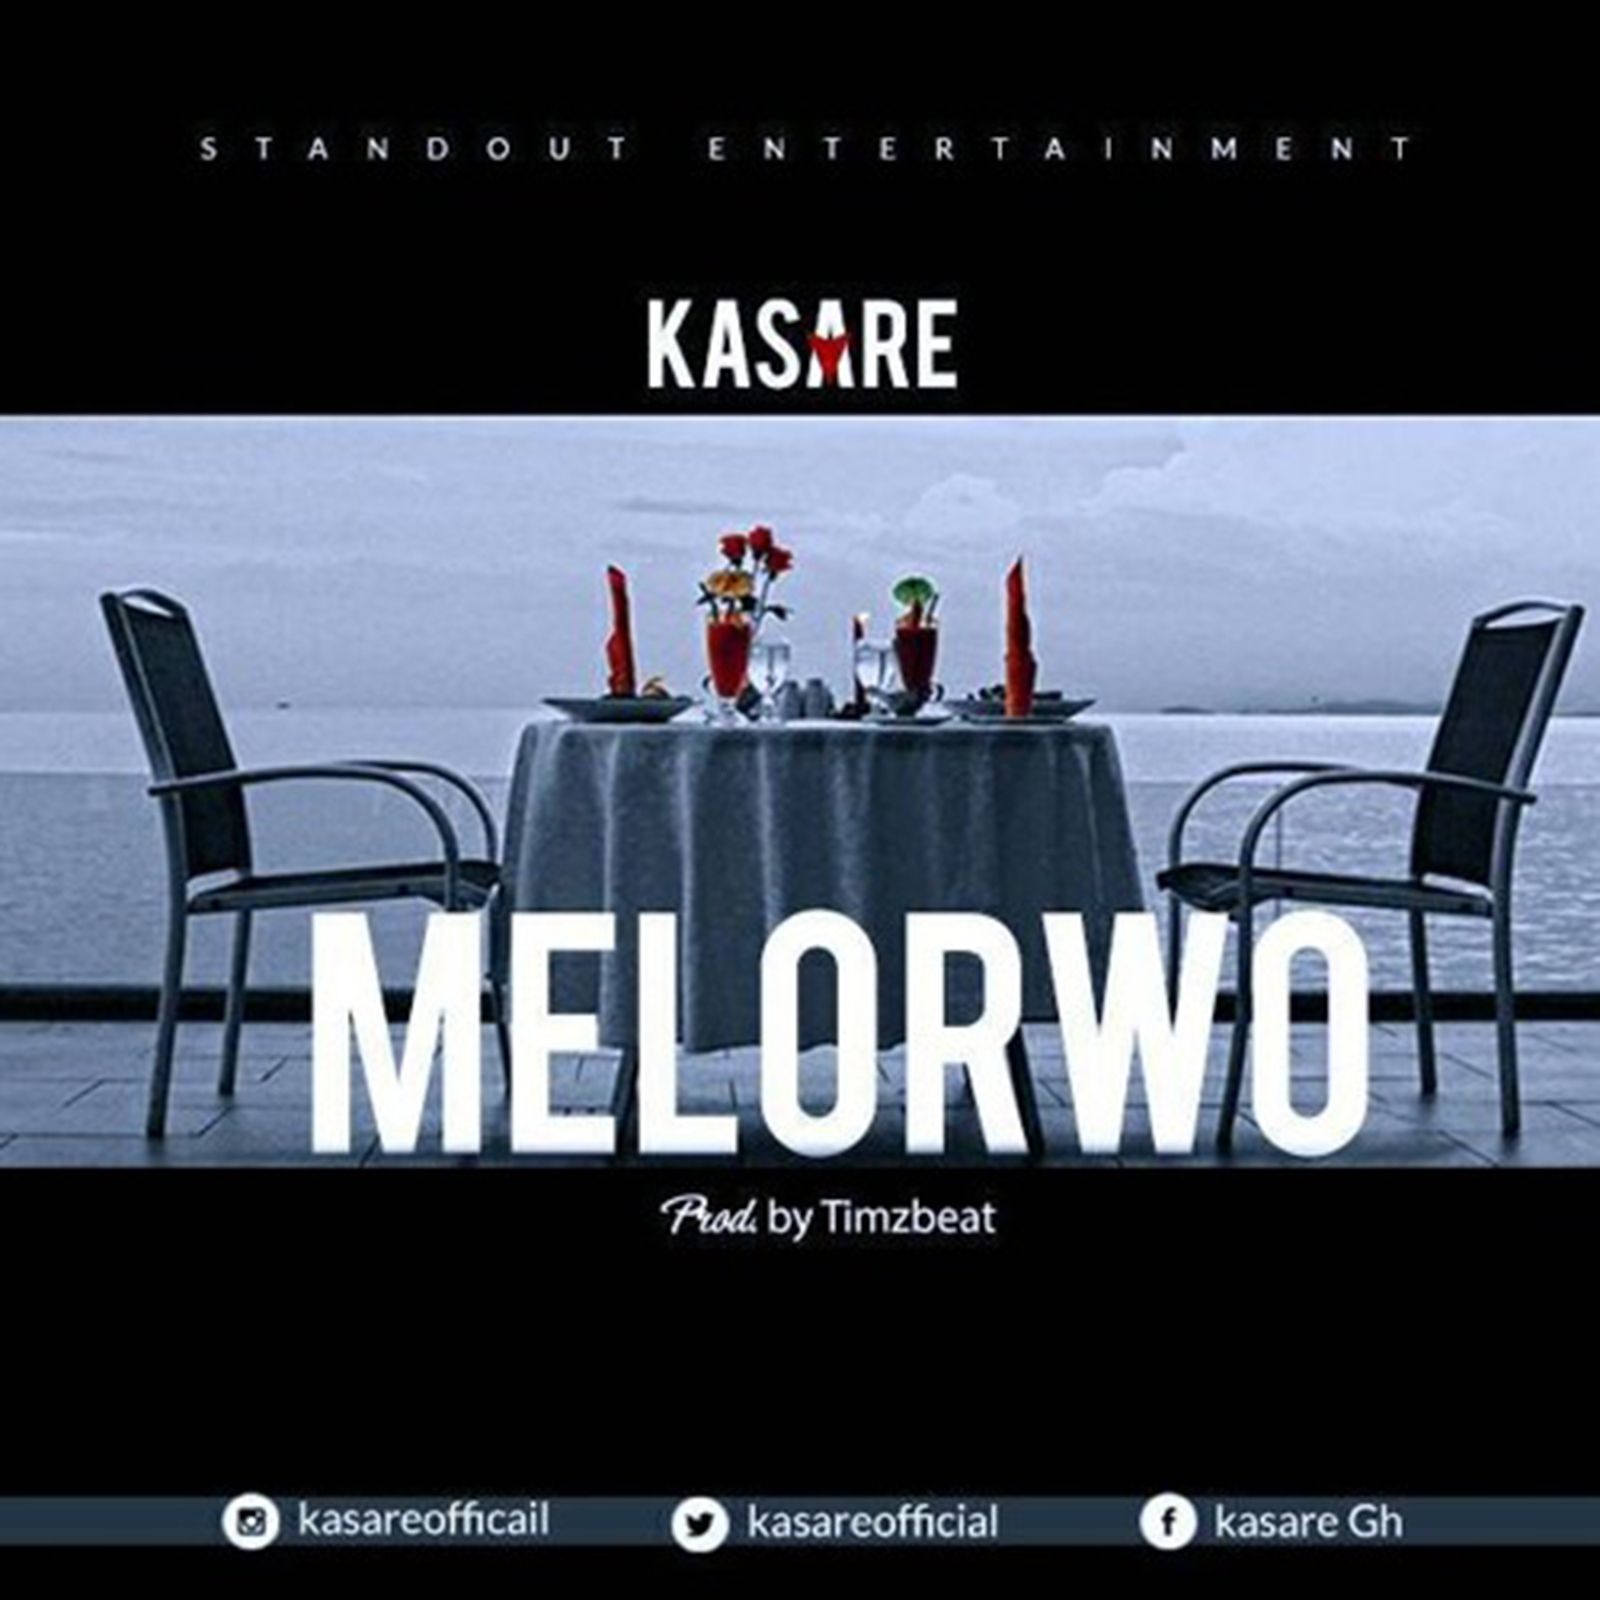 Melorwo by Kasare